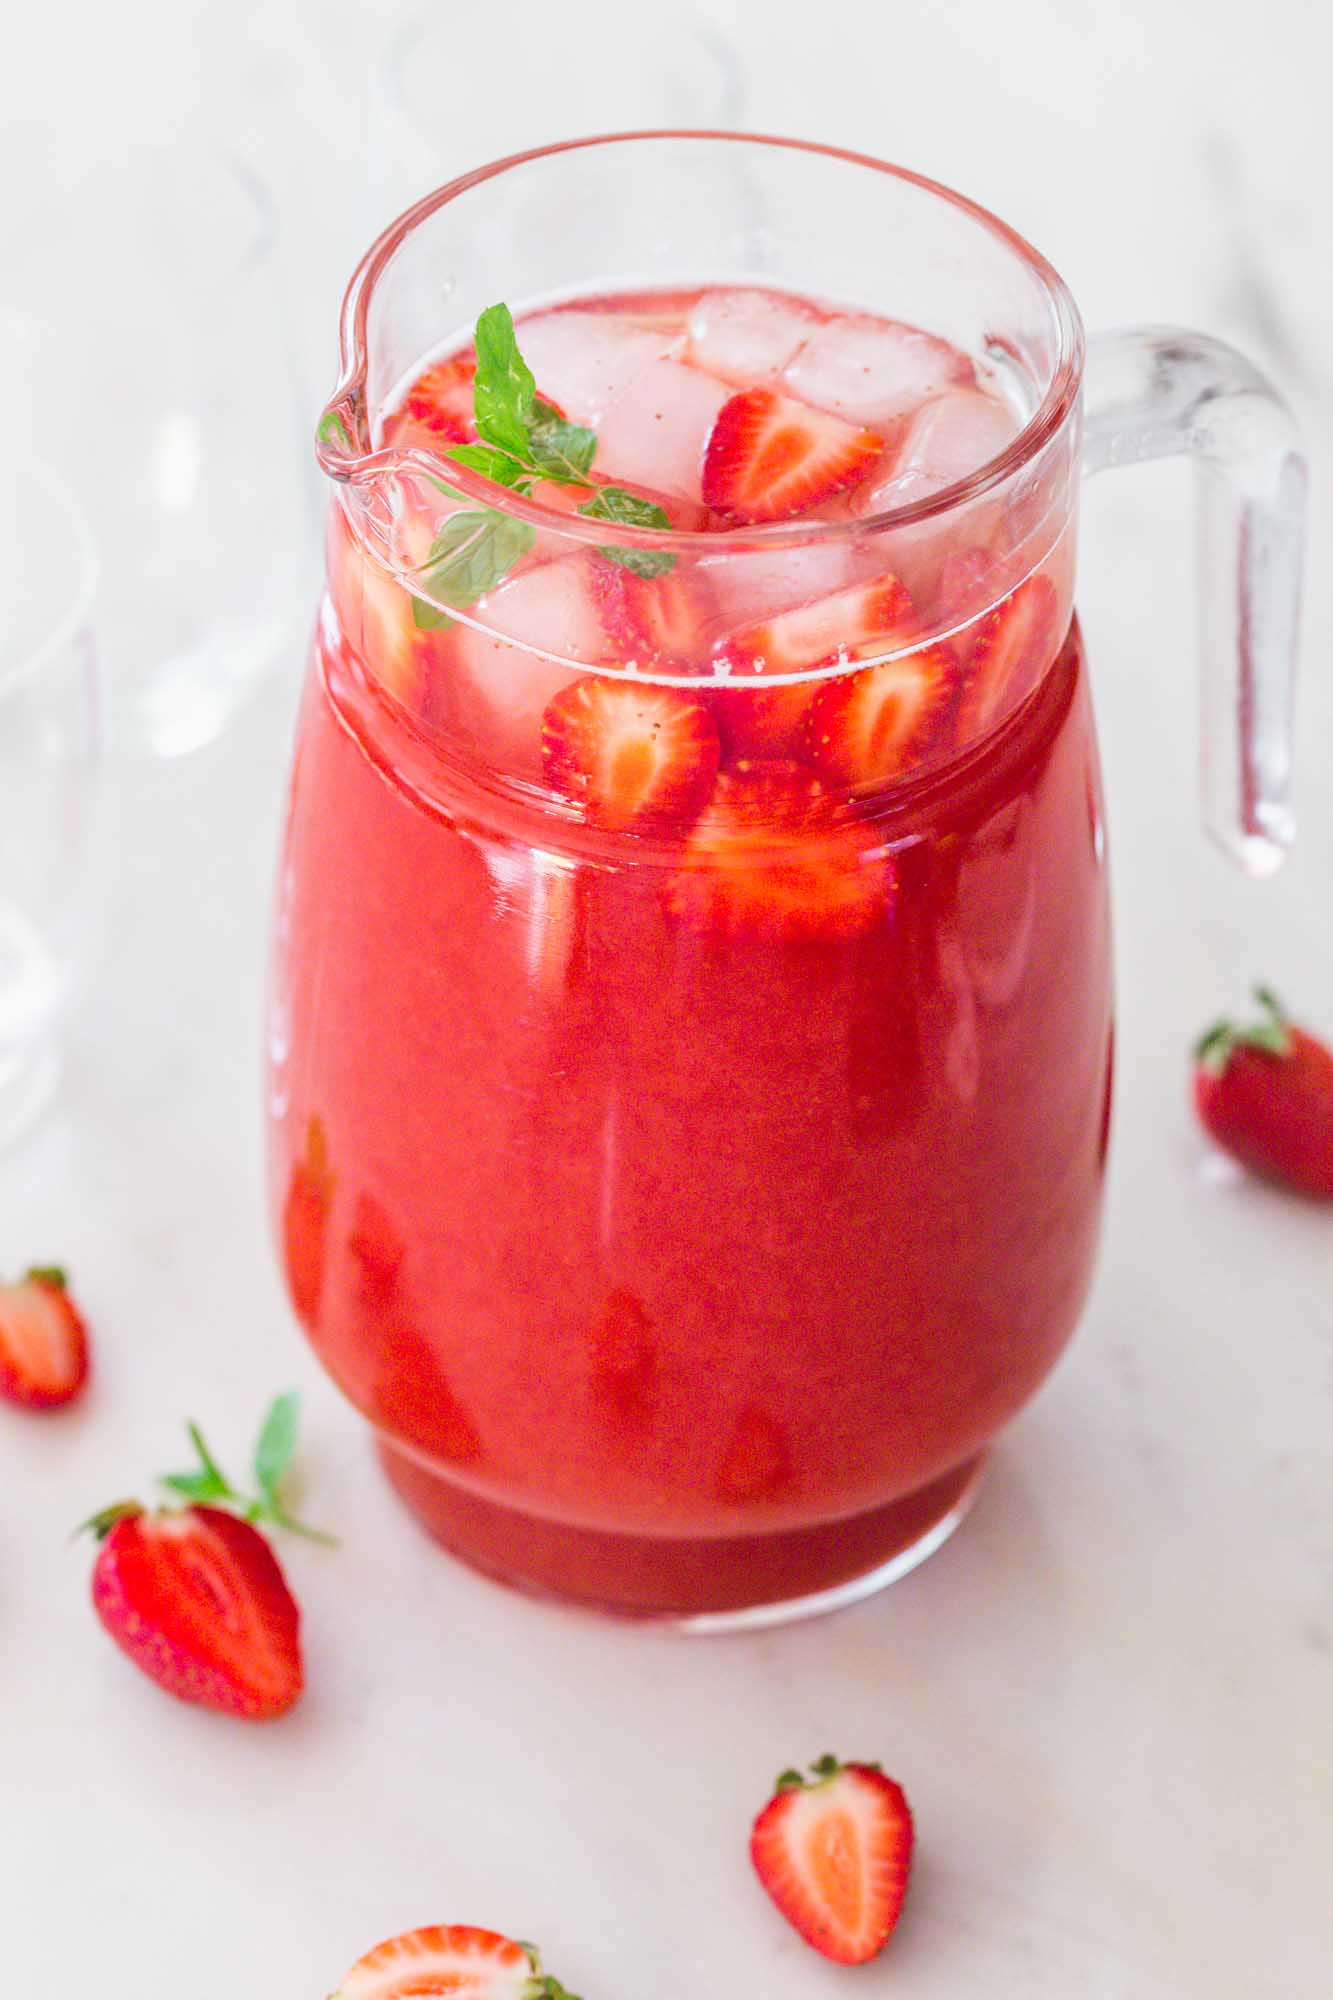 A glass pitcher with strawberry tea, ice cubes, fresh strawberries slices, and mint leaves garnish